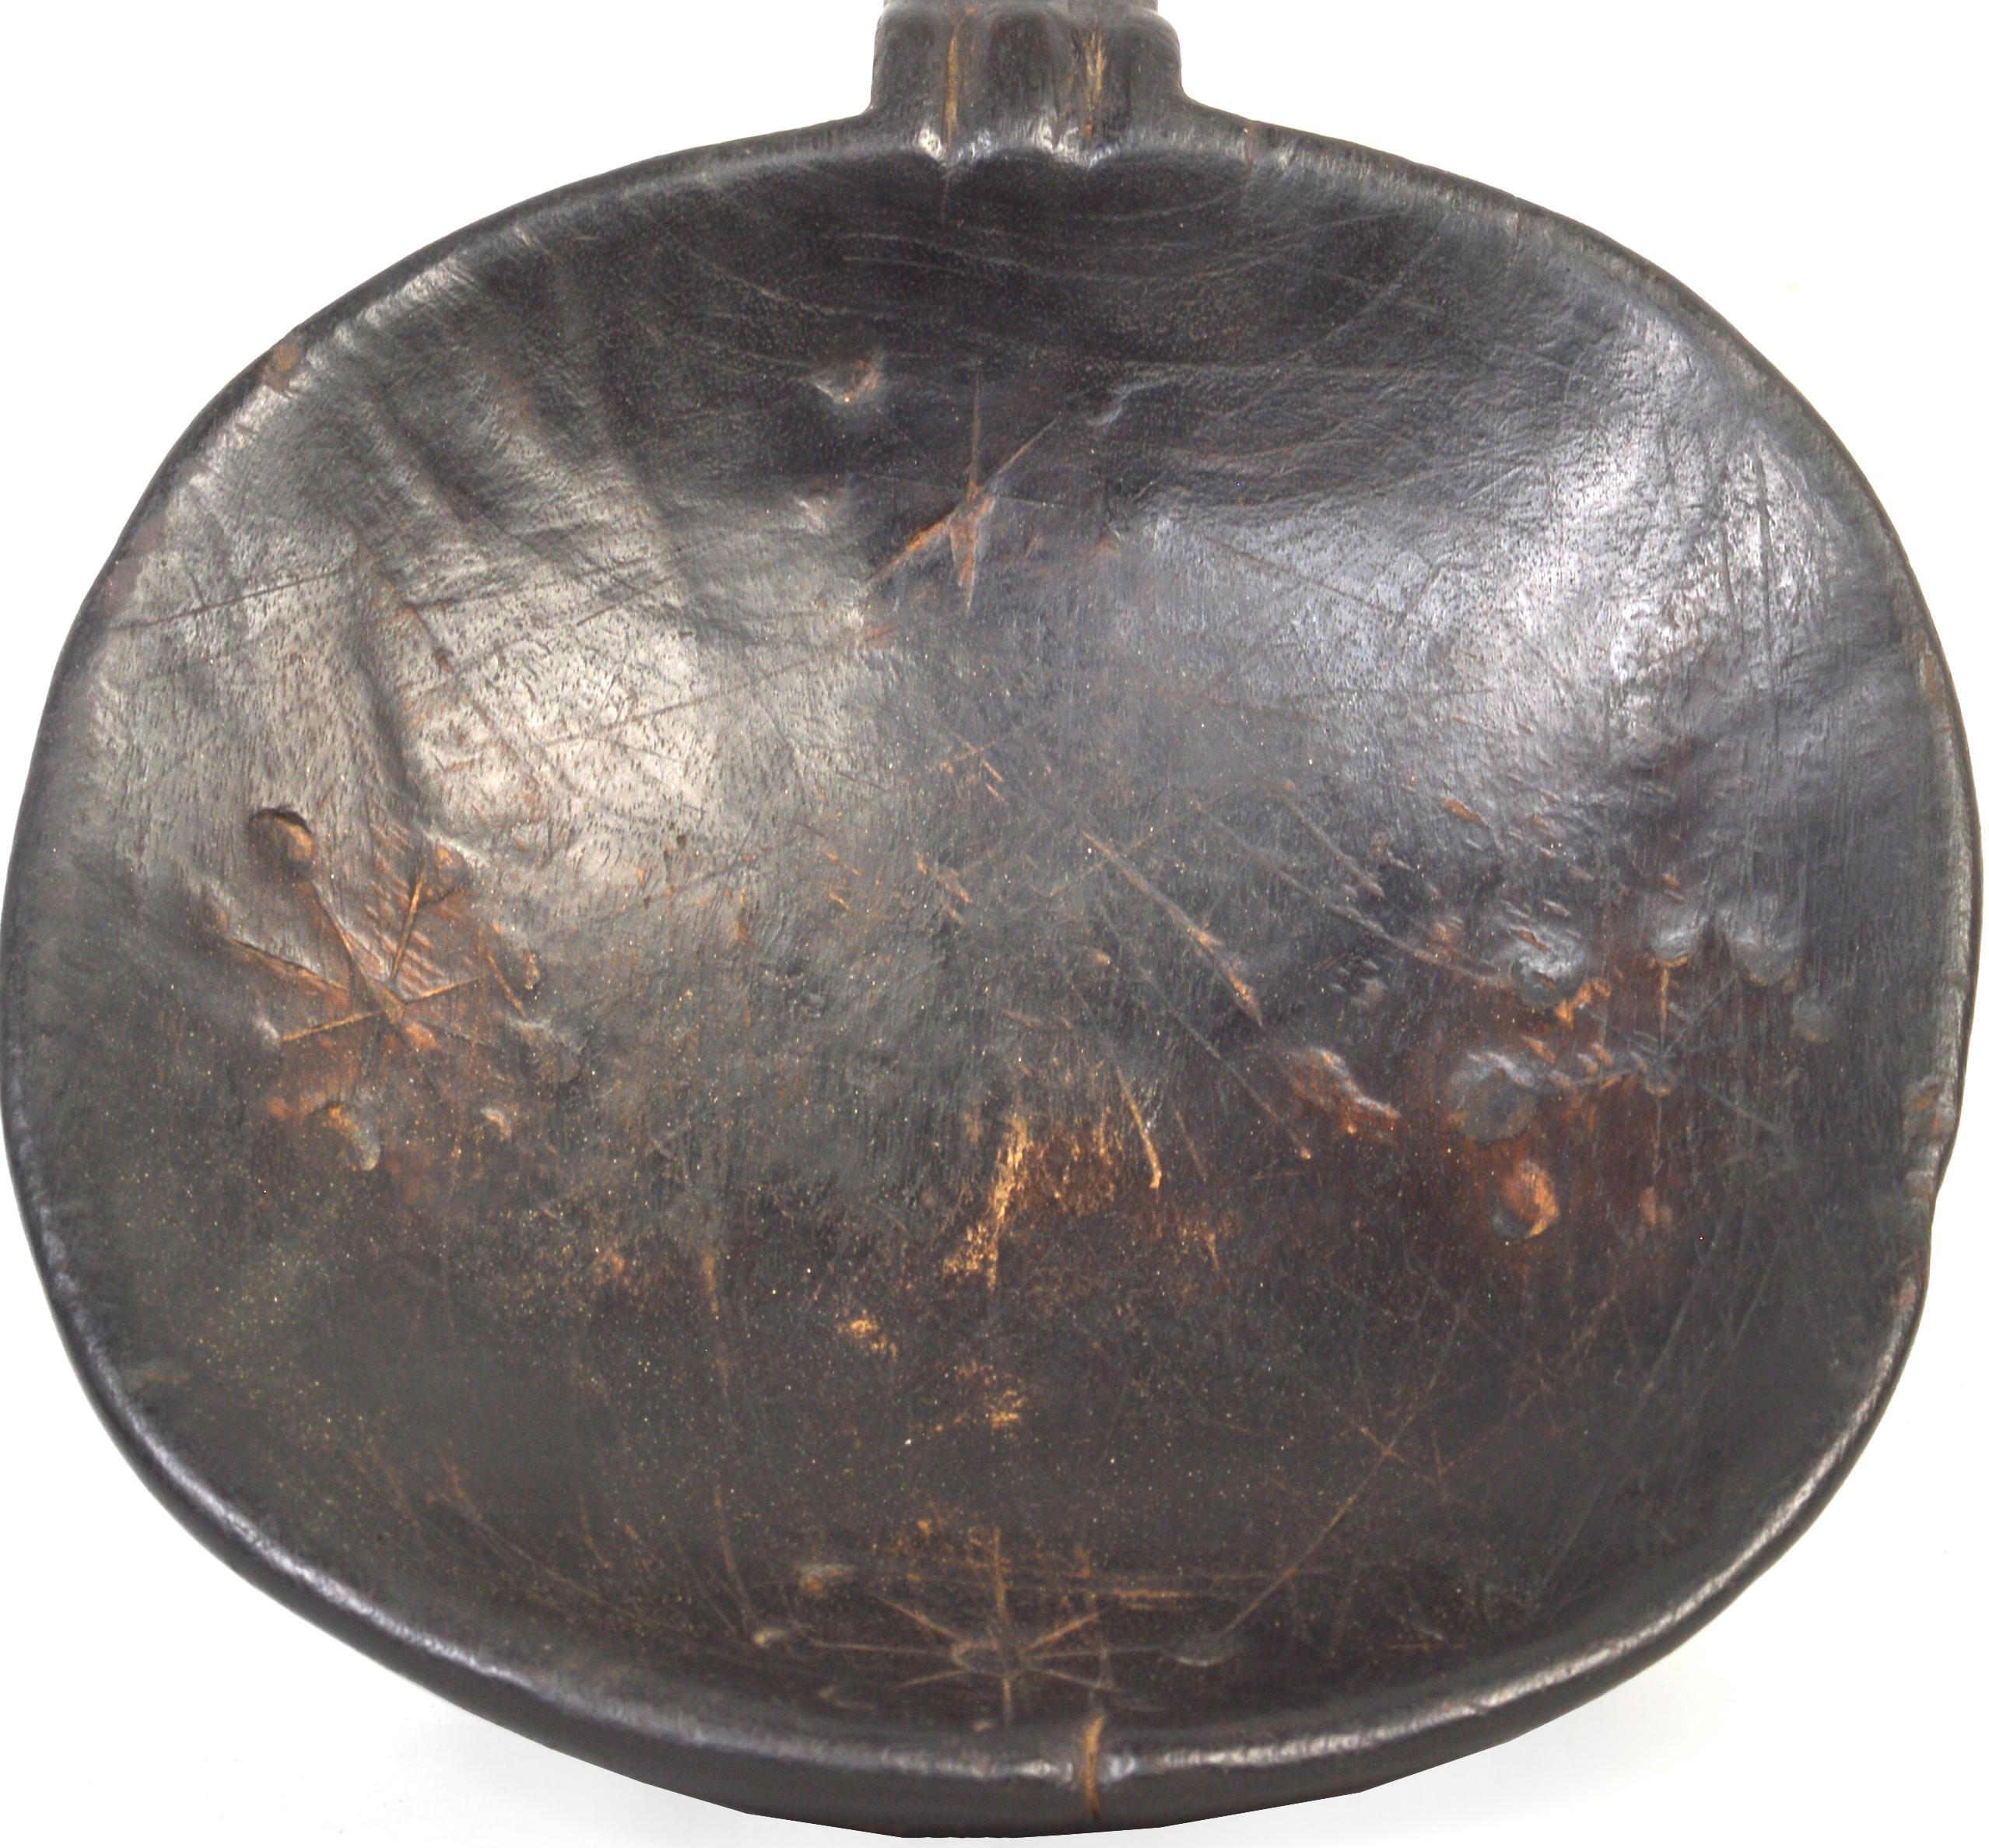 With over 200 ethnic groups in the Democratic Republic of Congo, tens of thousands of villages and millions of talented people, identifying ethnographic objects from the region can be difficult. Whatever the ethnicity of the creator of this ladle